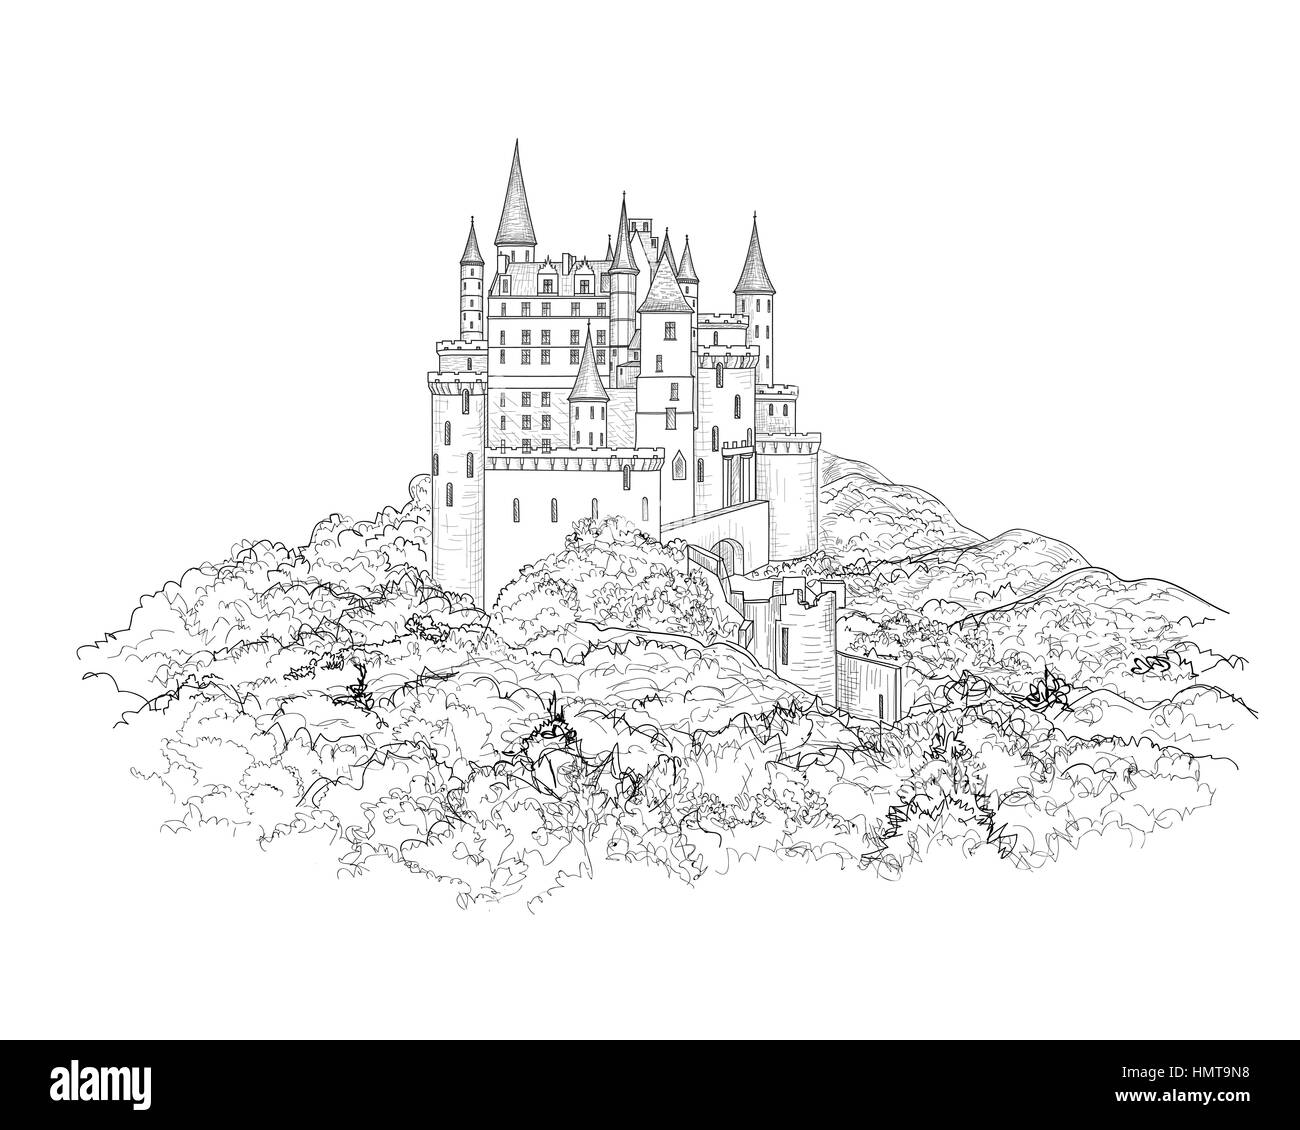 Famous French Castle Landscape. Travel france Background. Castle building on the hill skyline etching. Hand drawn sketch  illustration. Stock Vector